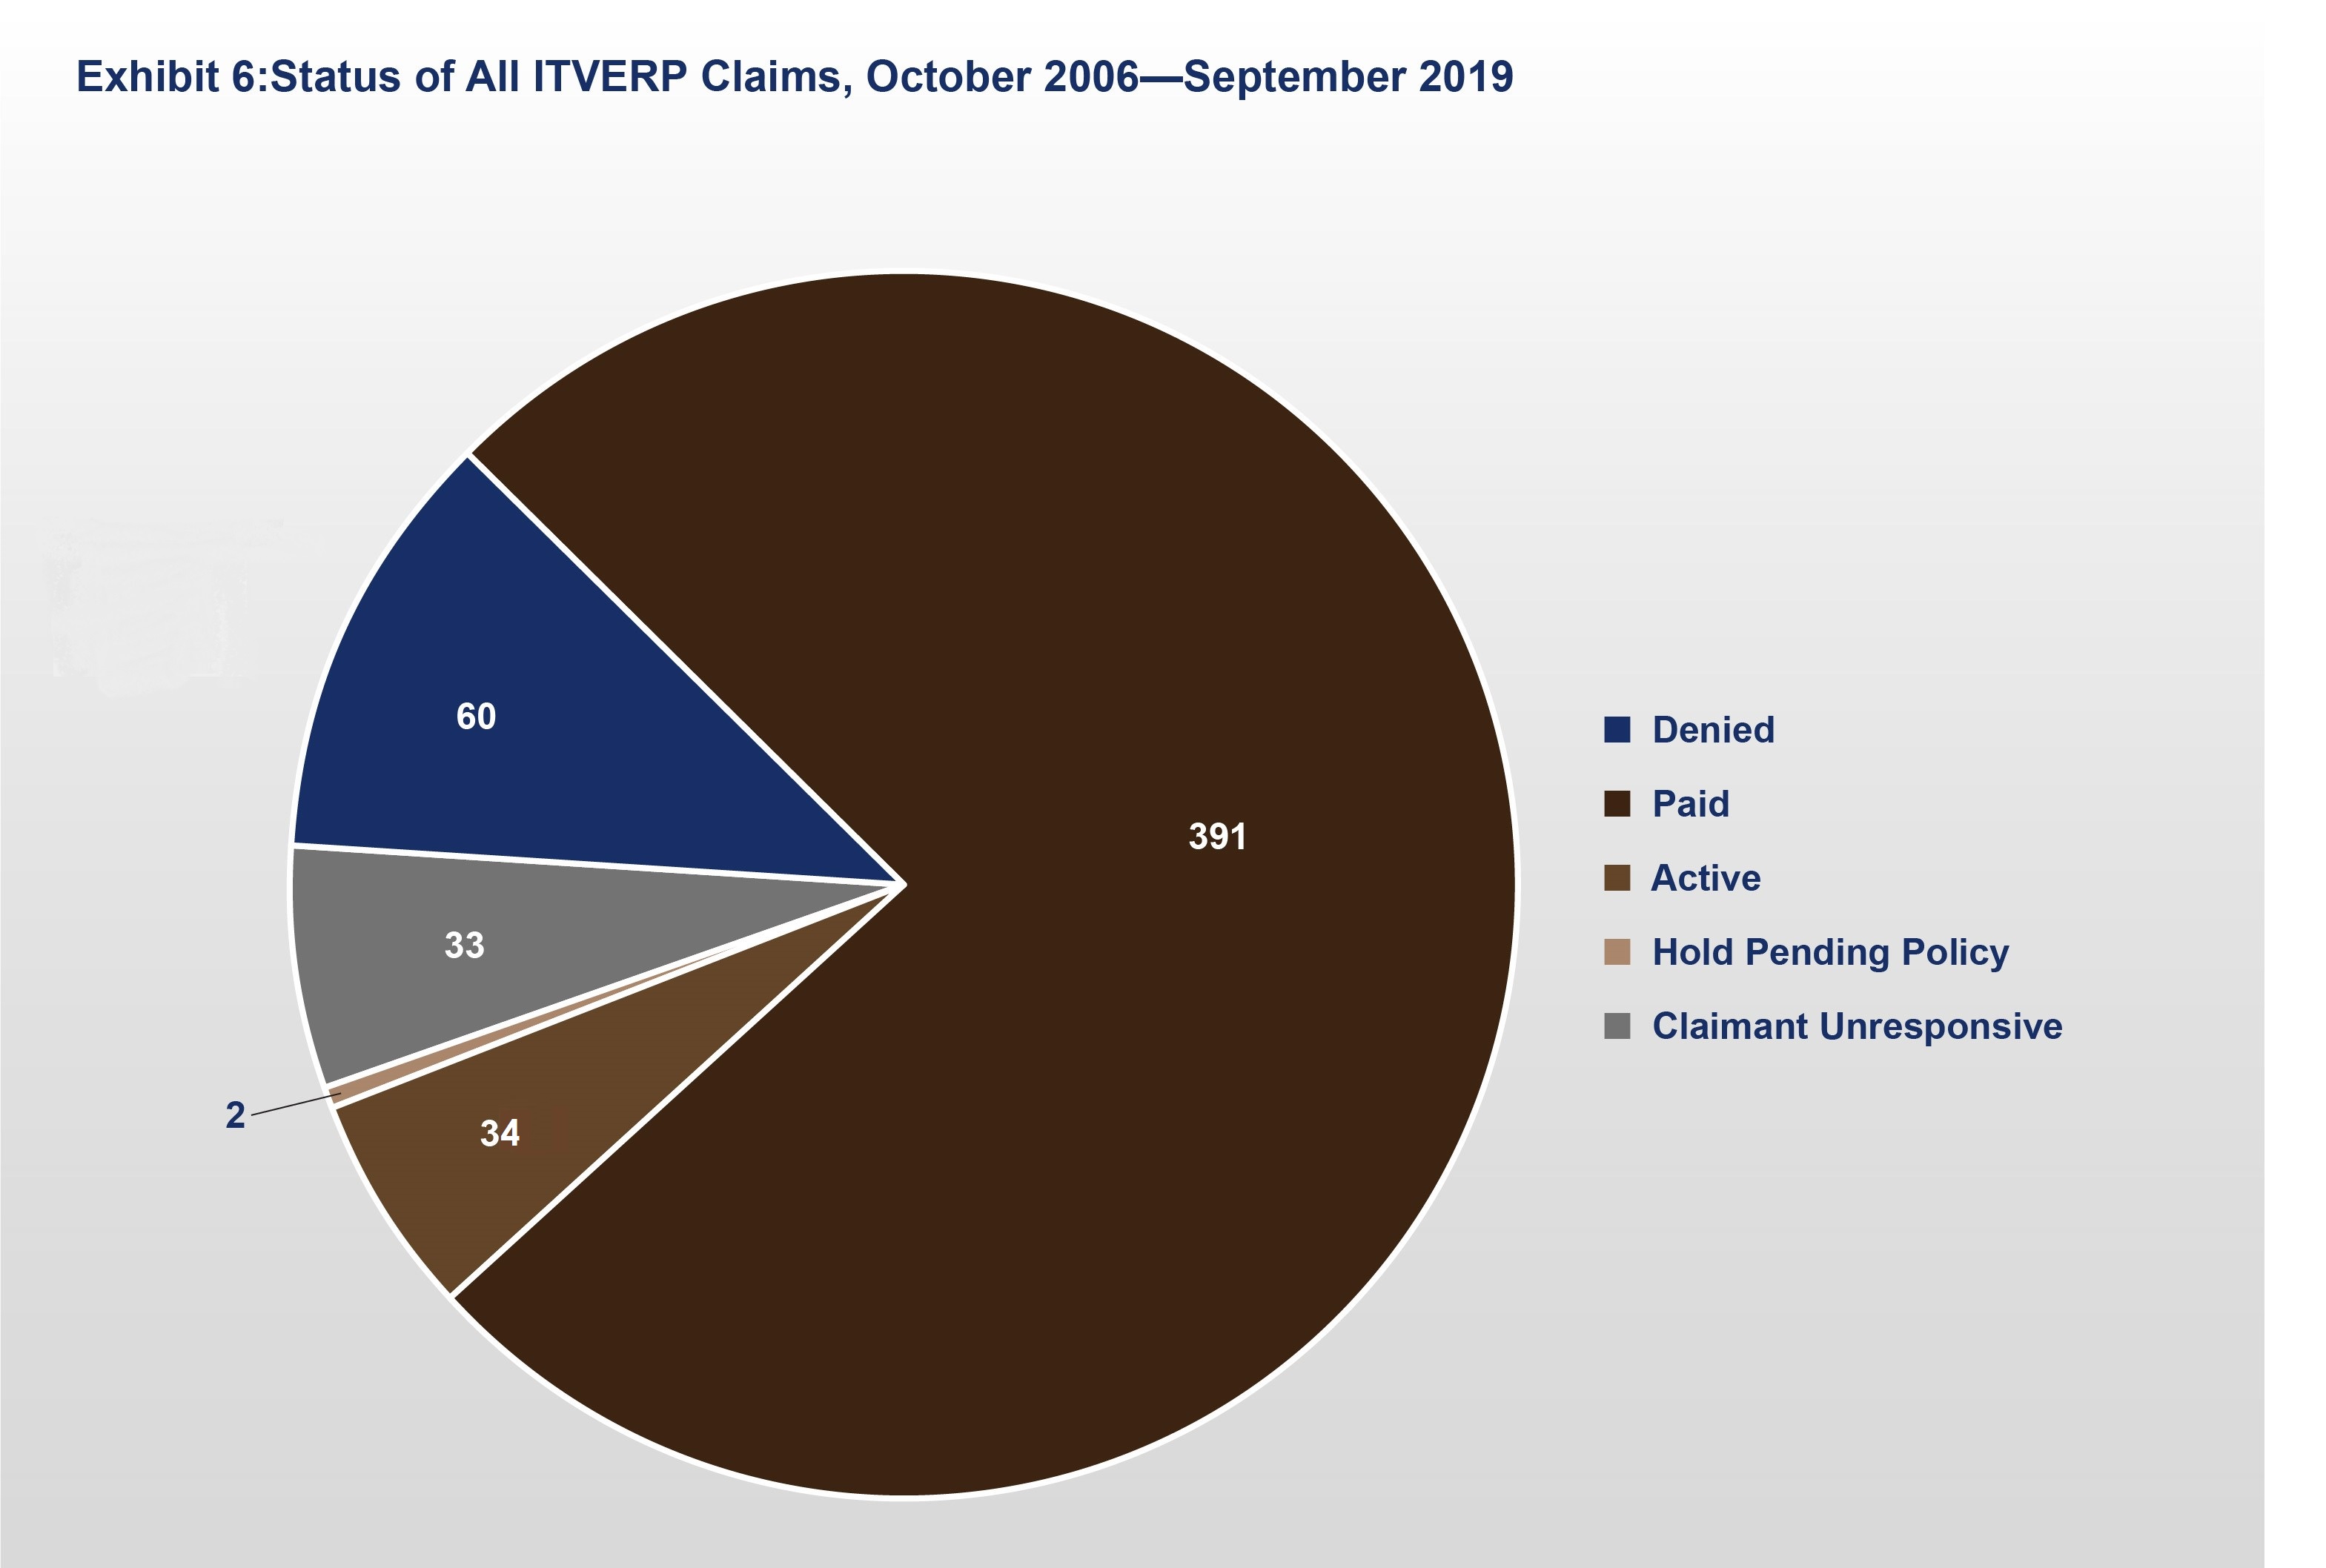 Exhibit 6: Status of All ITVERP Claims October 2006 - September 2019